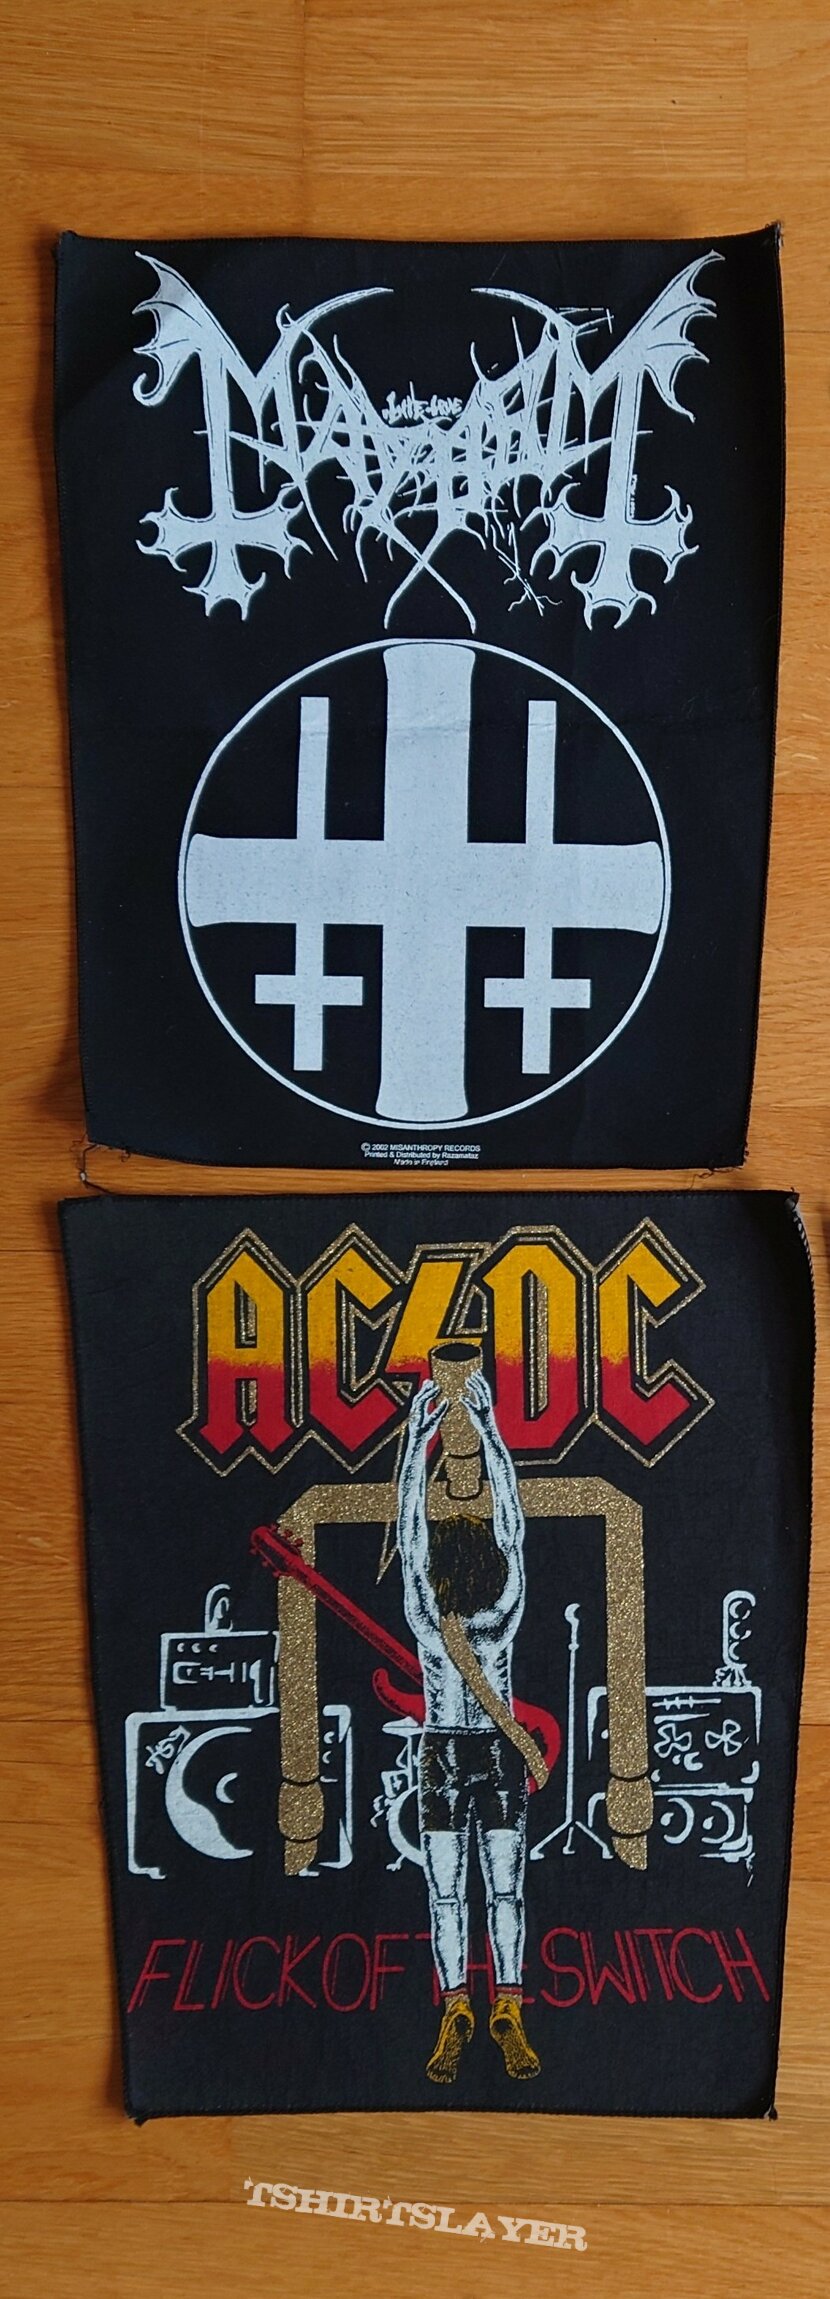 MSG Midnight Patches / backpatches